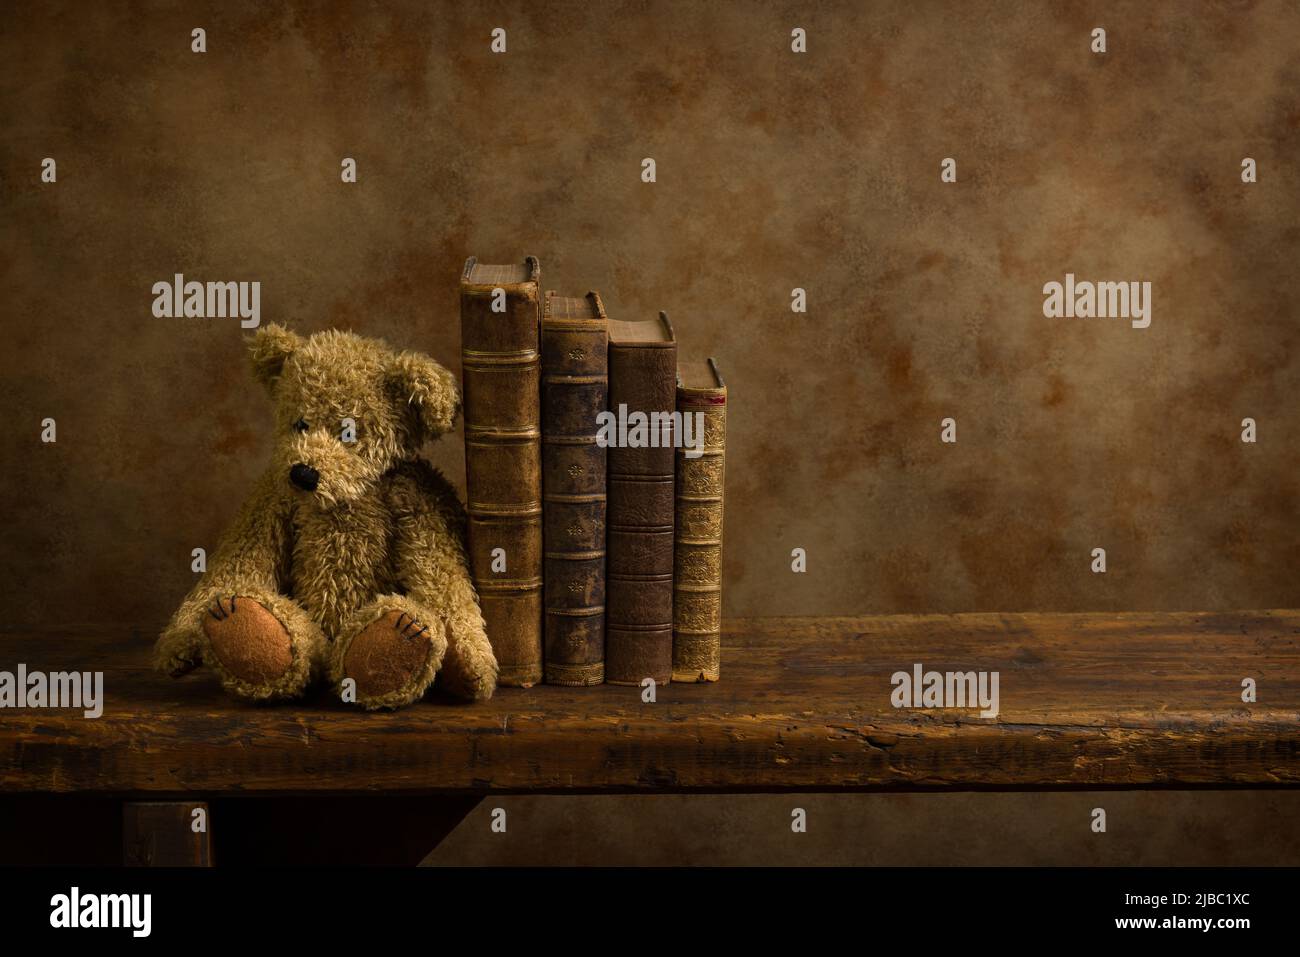 Vintage teddy bear and antique books on a rustic old wooden shelf. This is suitable for digital compositing. Stock Photo